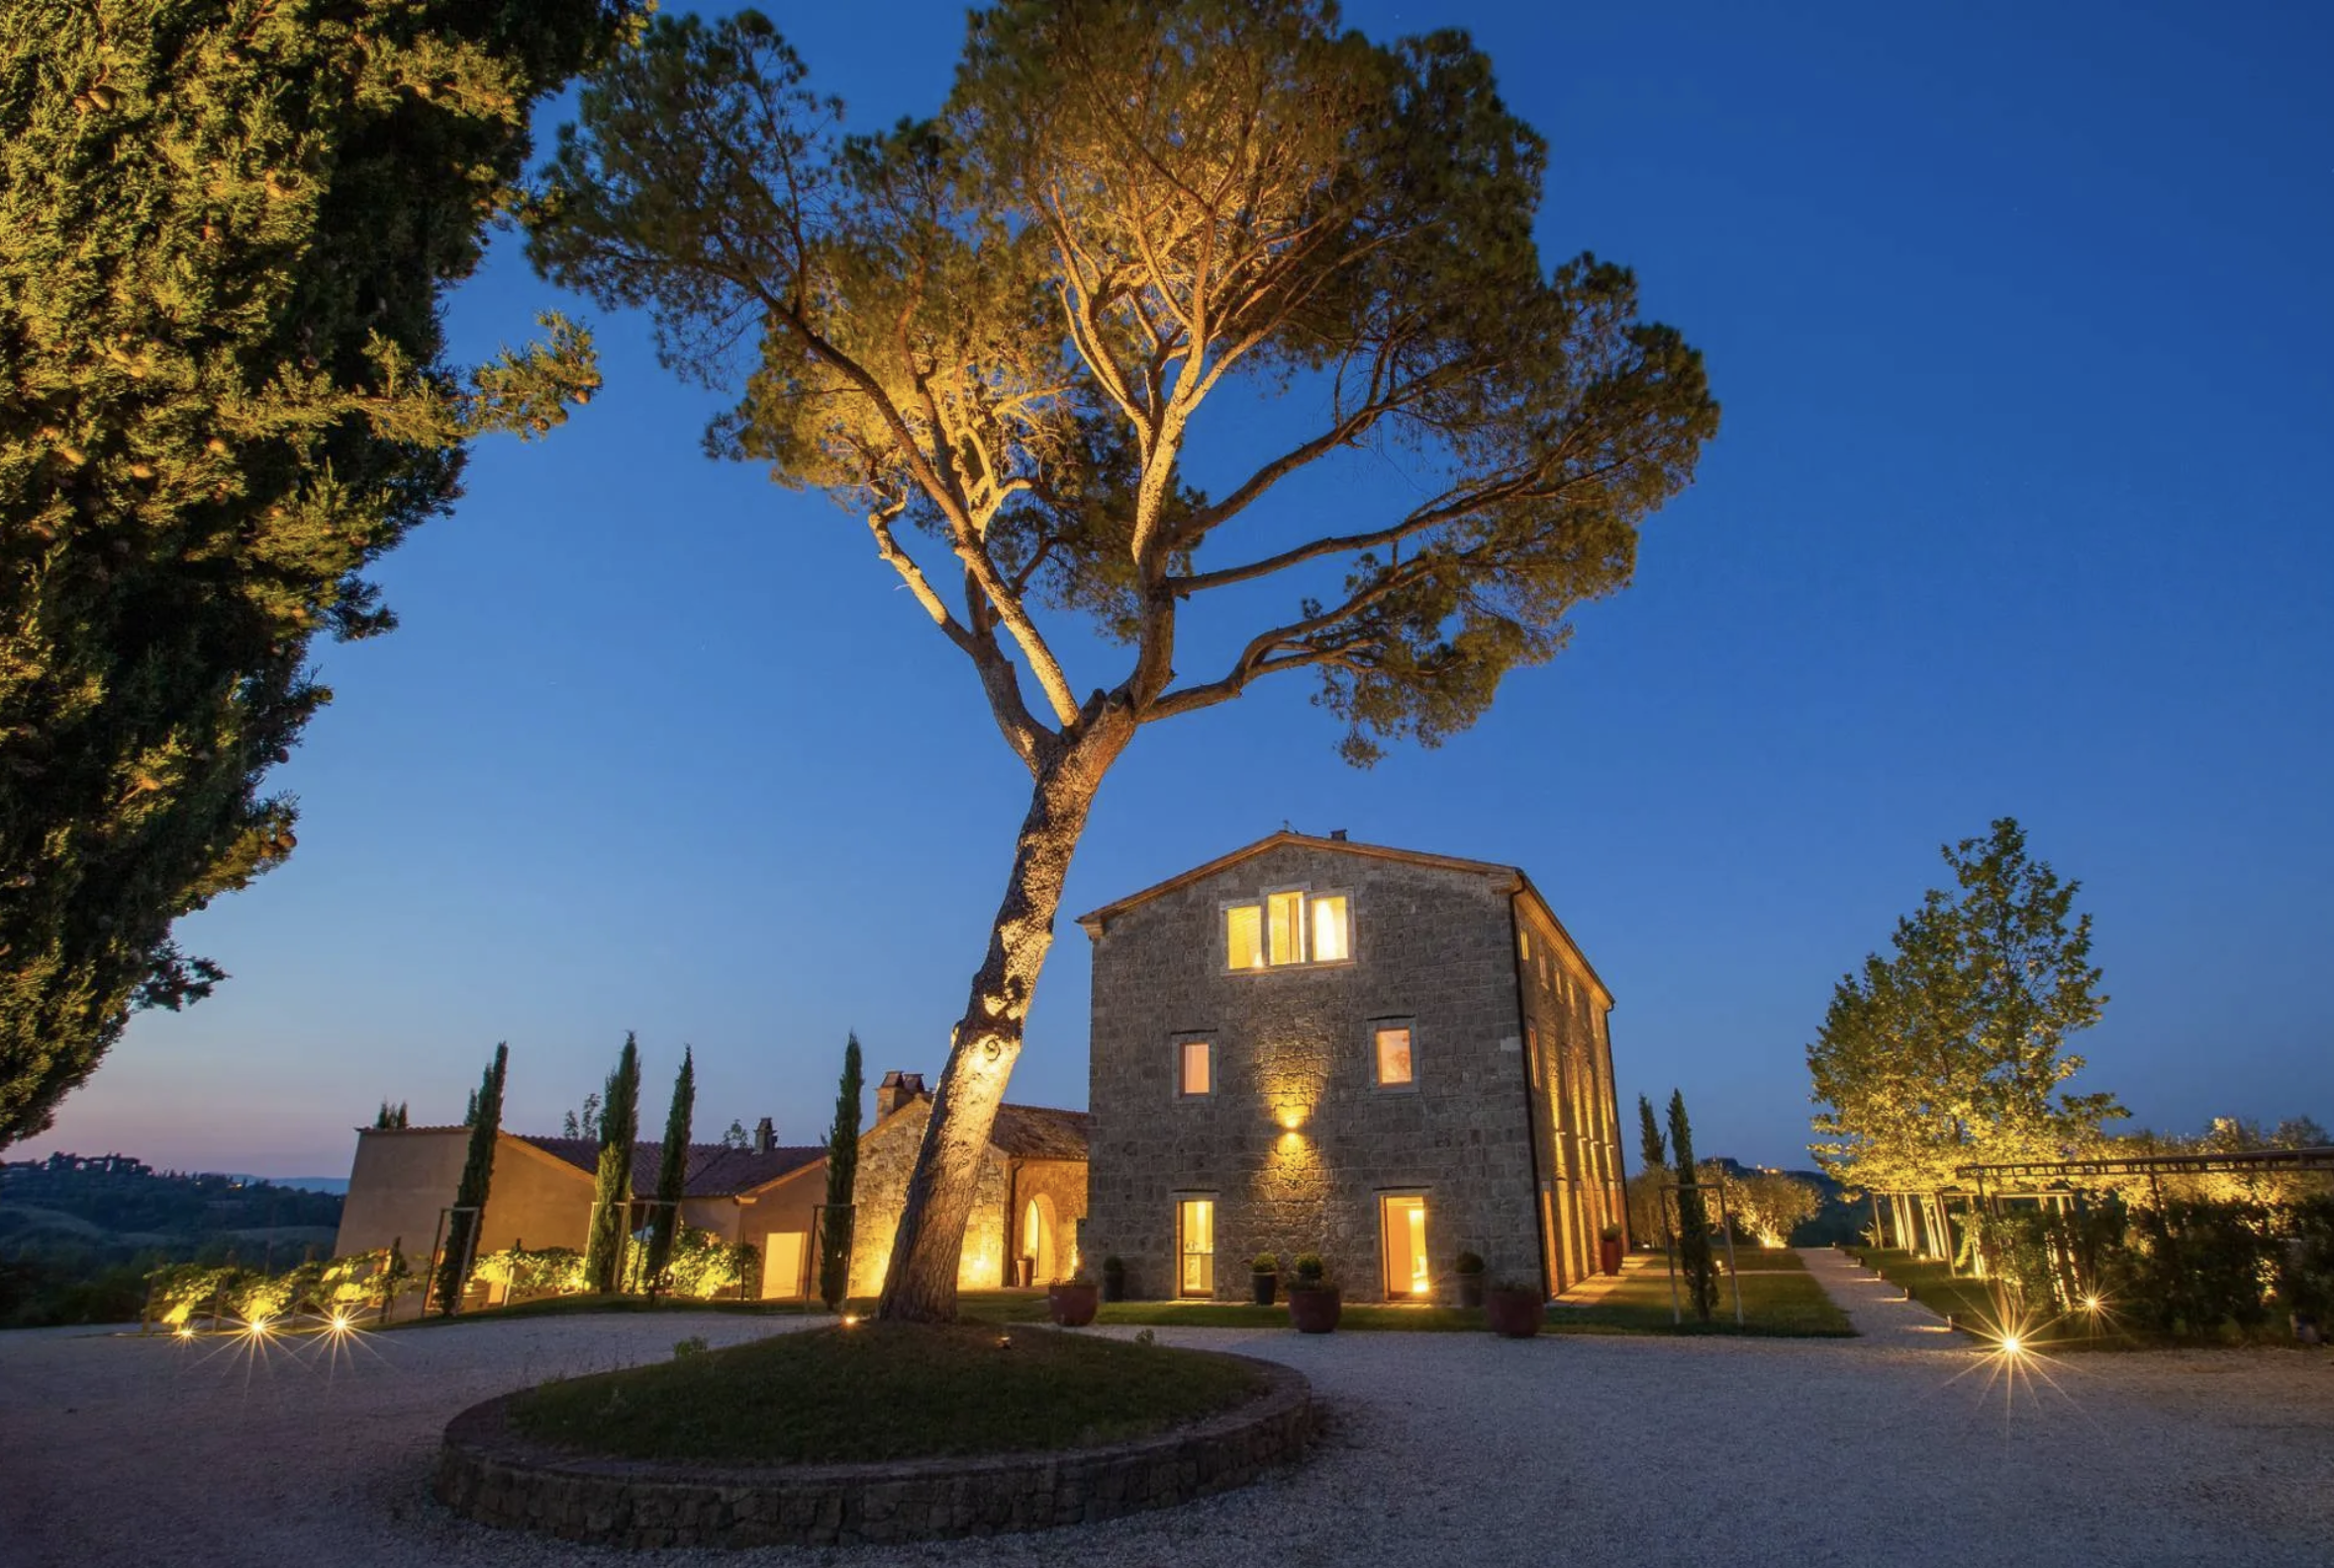 Francis York Villa Travertino: Luxury Villa and Wine Estate in the Heart of Tuscany 19.png